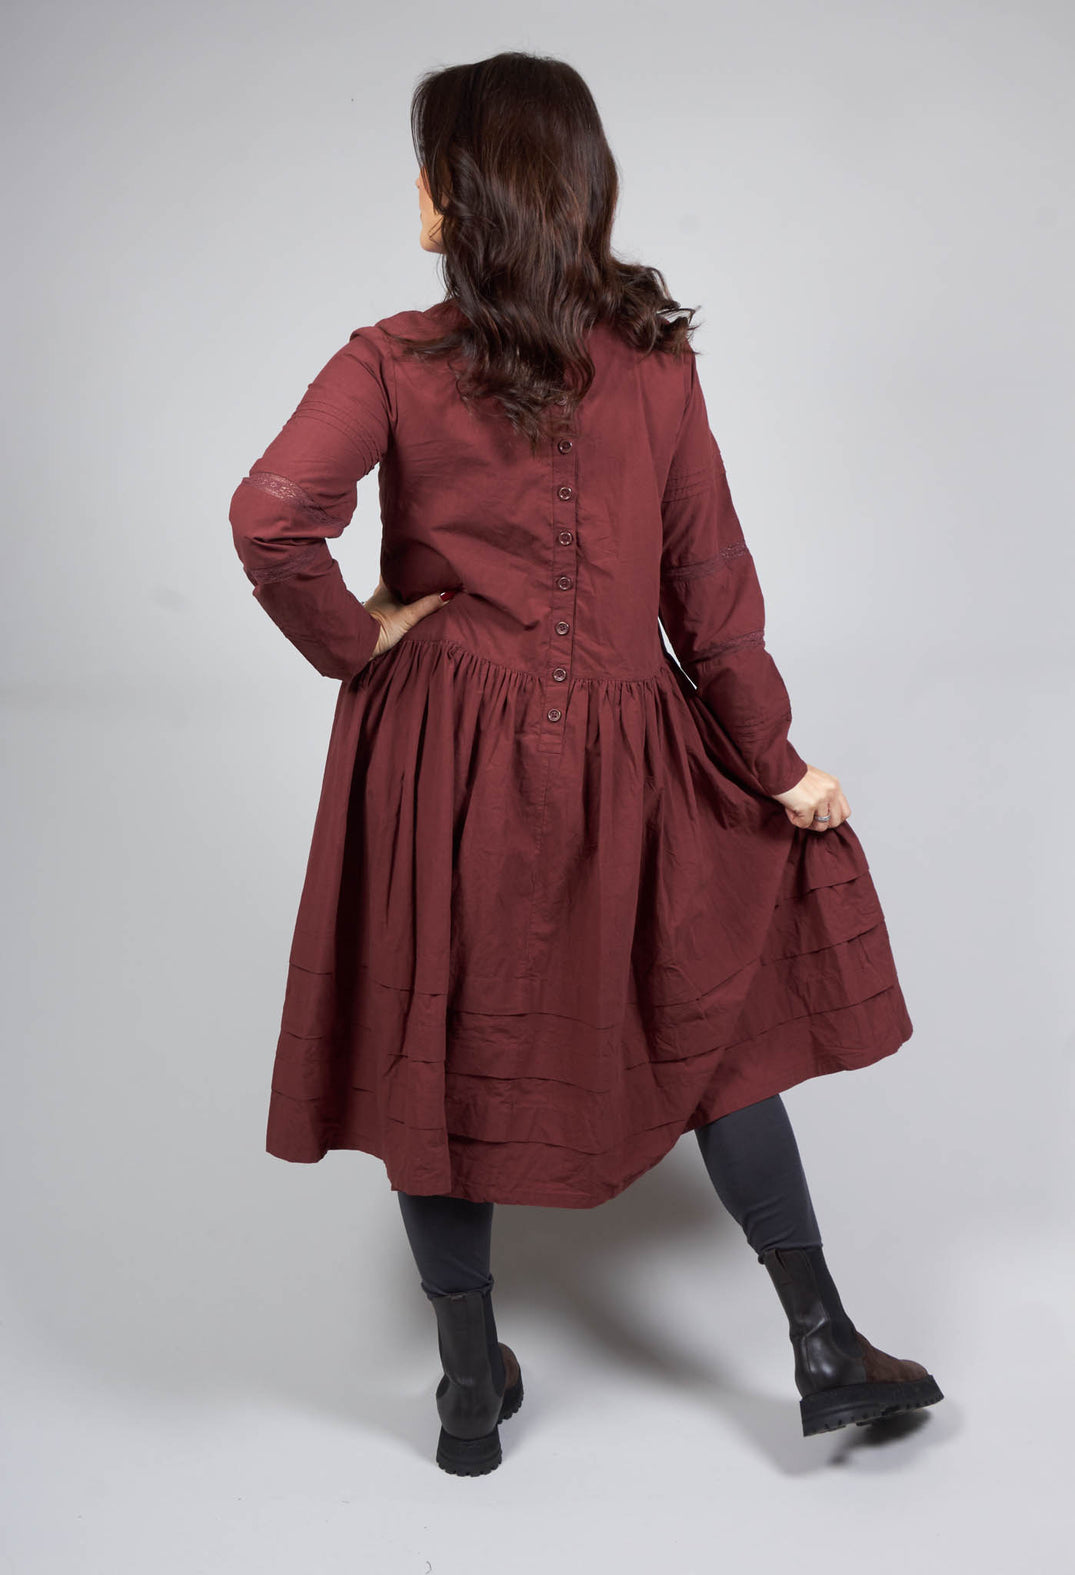 High Neck Cotton Dress with Pin Tucks in Maroon